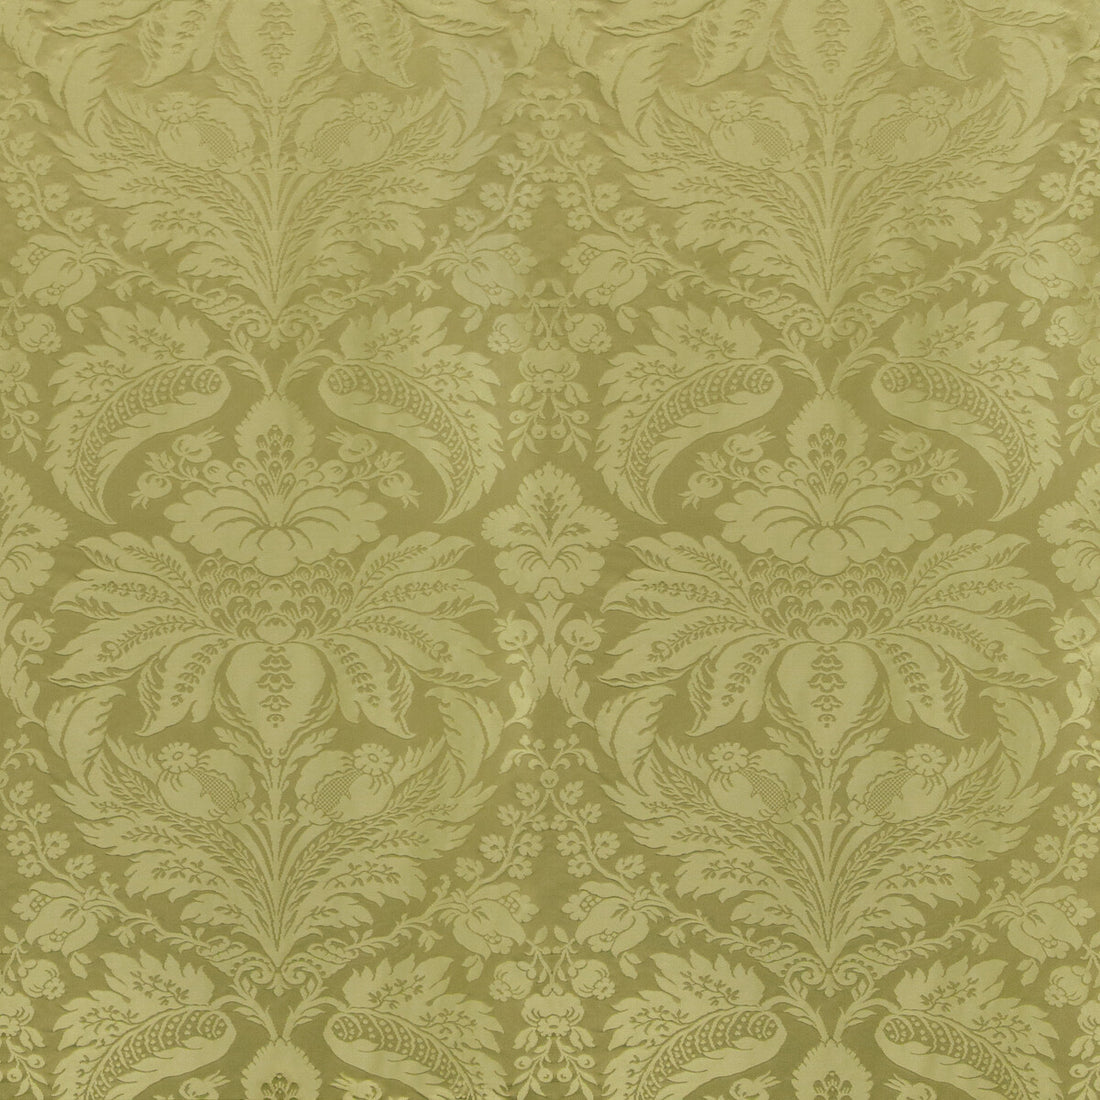 Damask Pierre fabric in olive color - pattern 8013188.30.0 - by Brunschwig &amp; Fils in the B&amp;F Showroom Exclusive 2019 collection